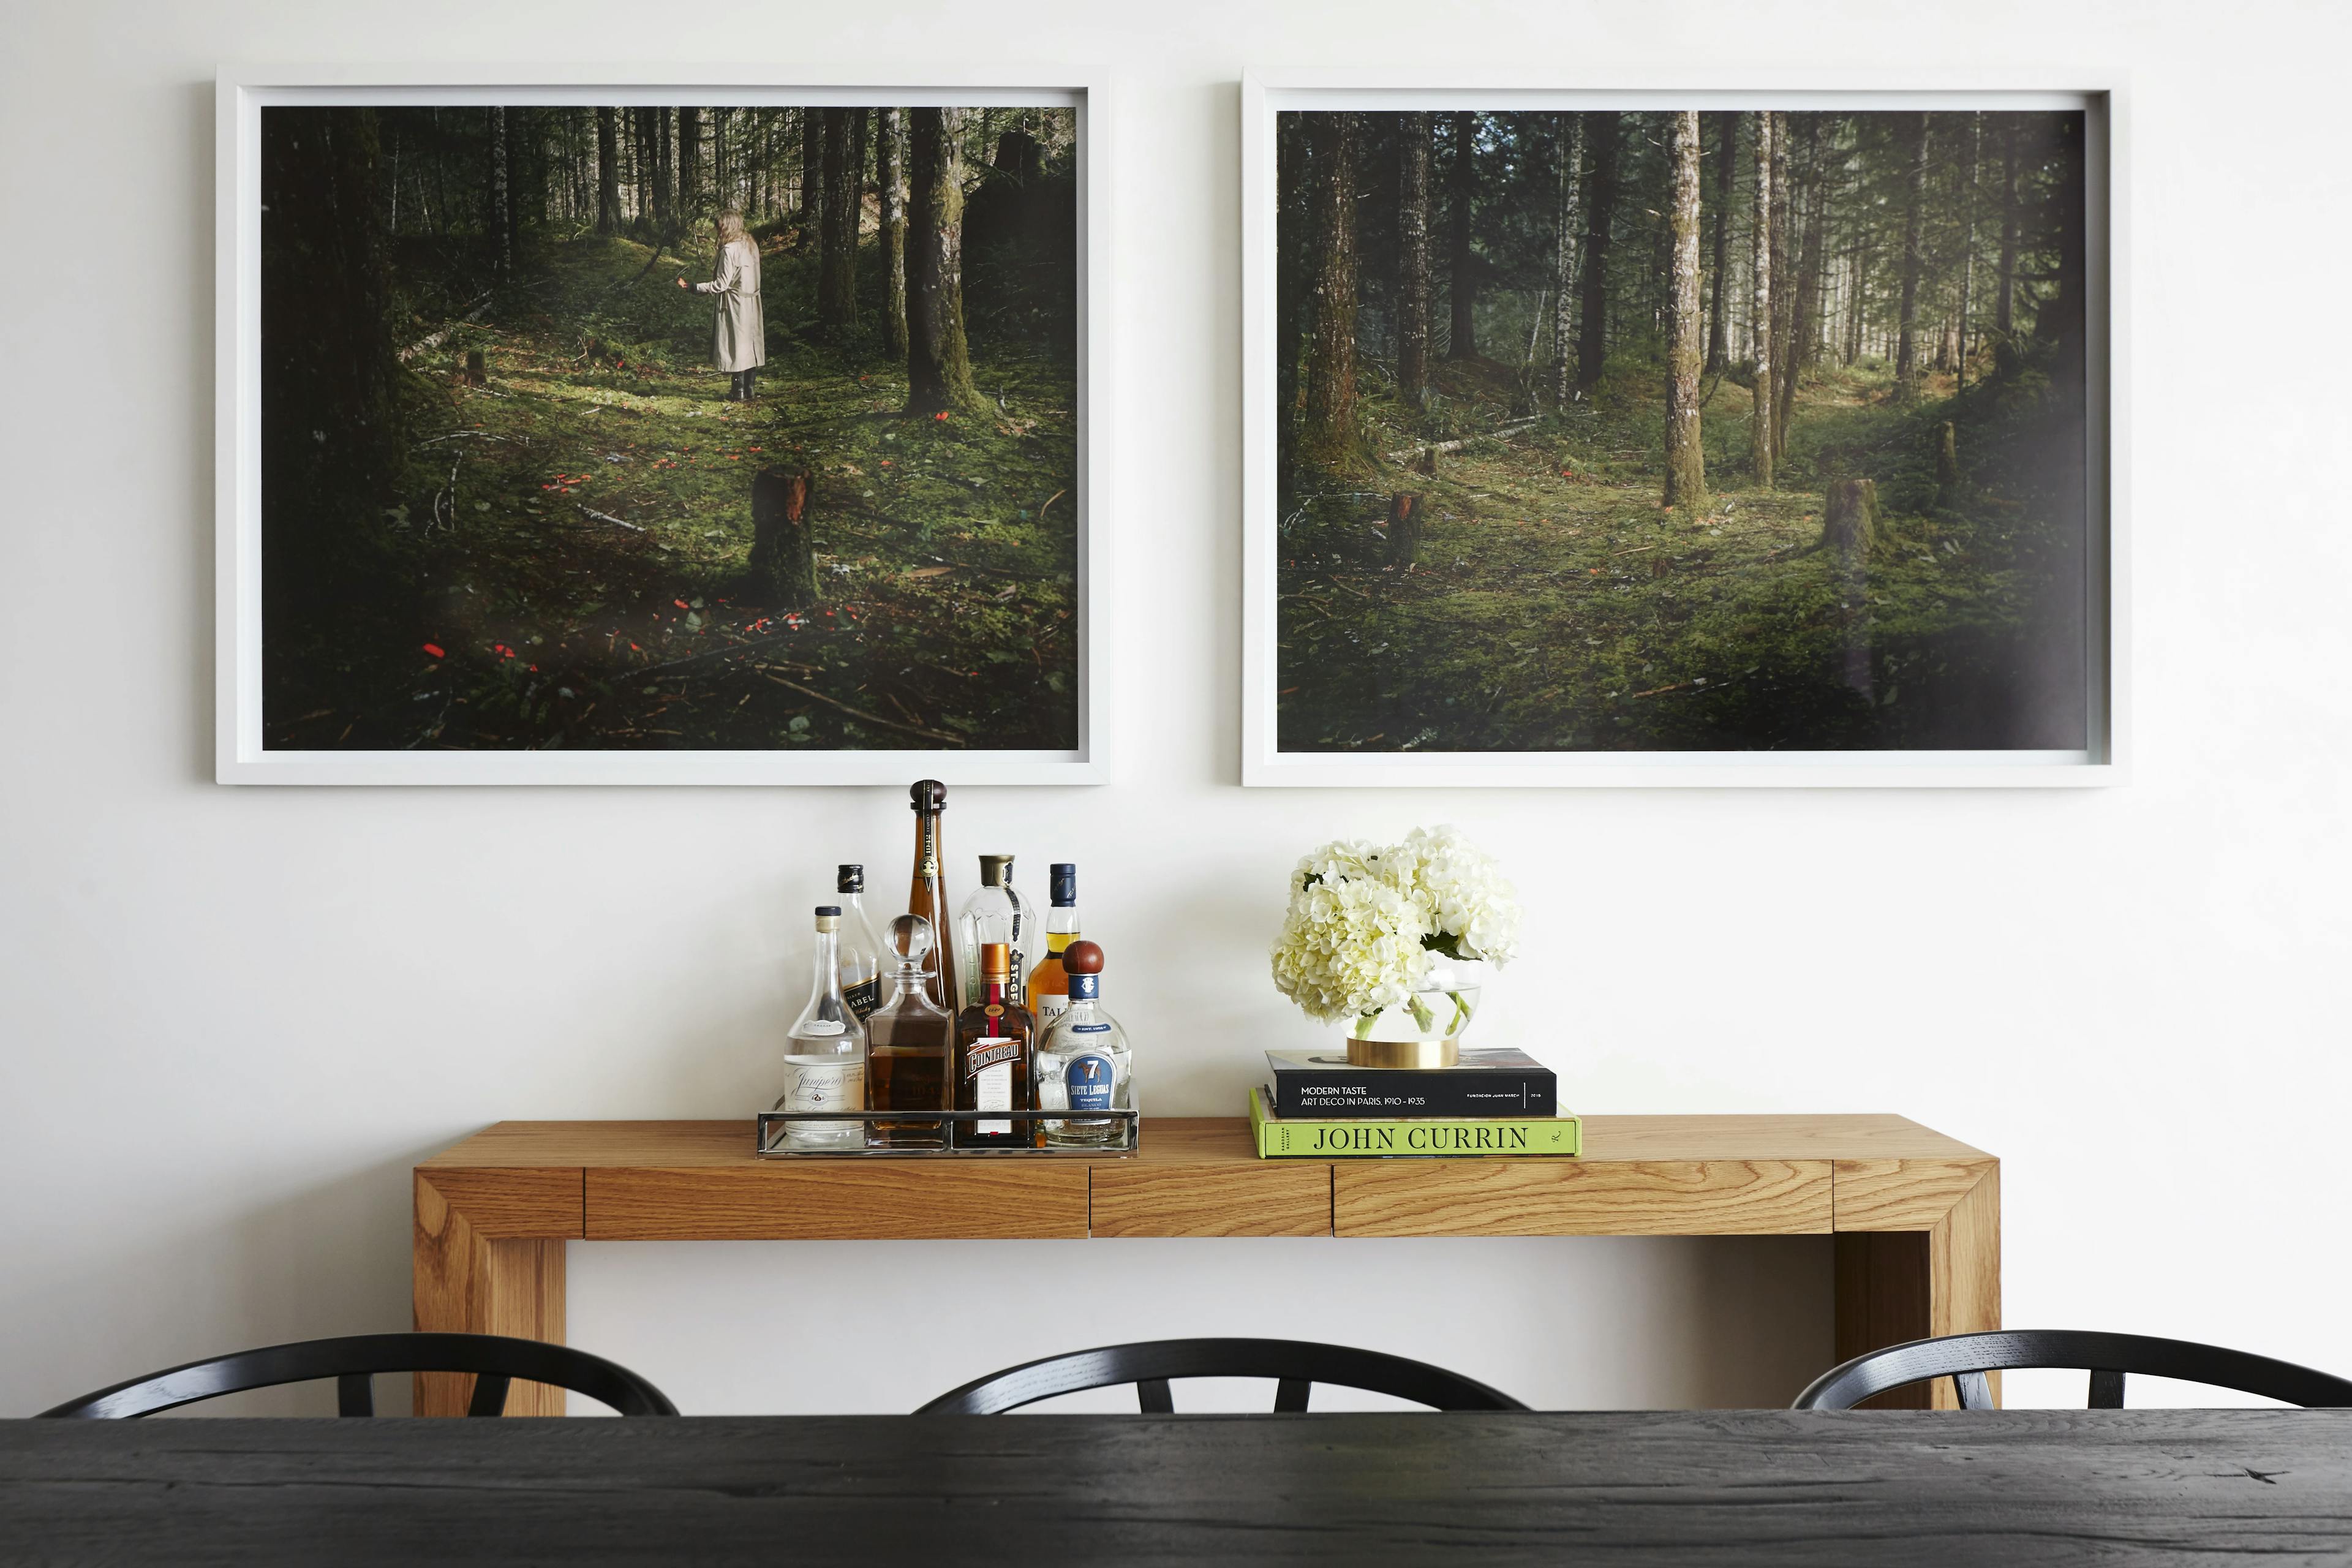 Two photographs by Anna Beeke in a DUMBO dining room.